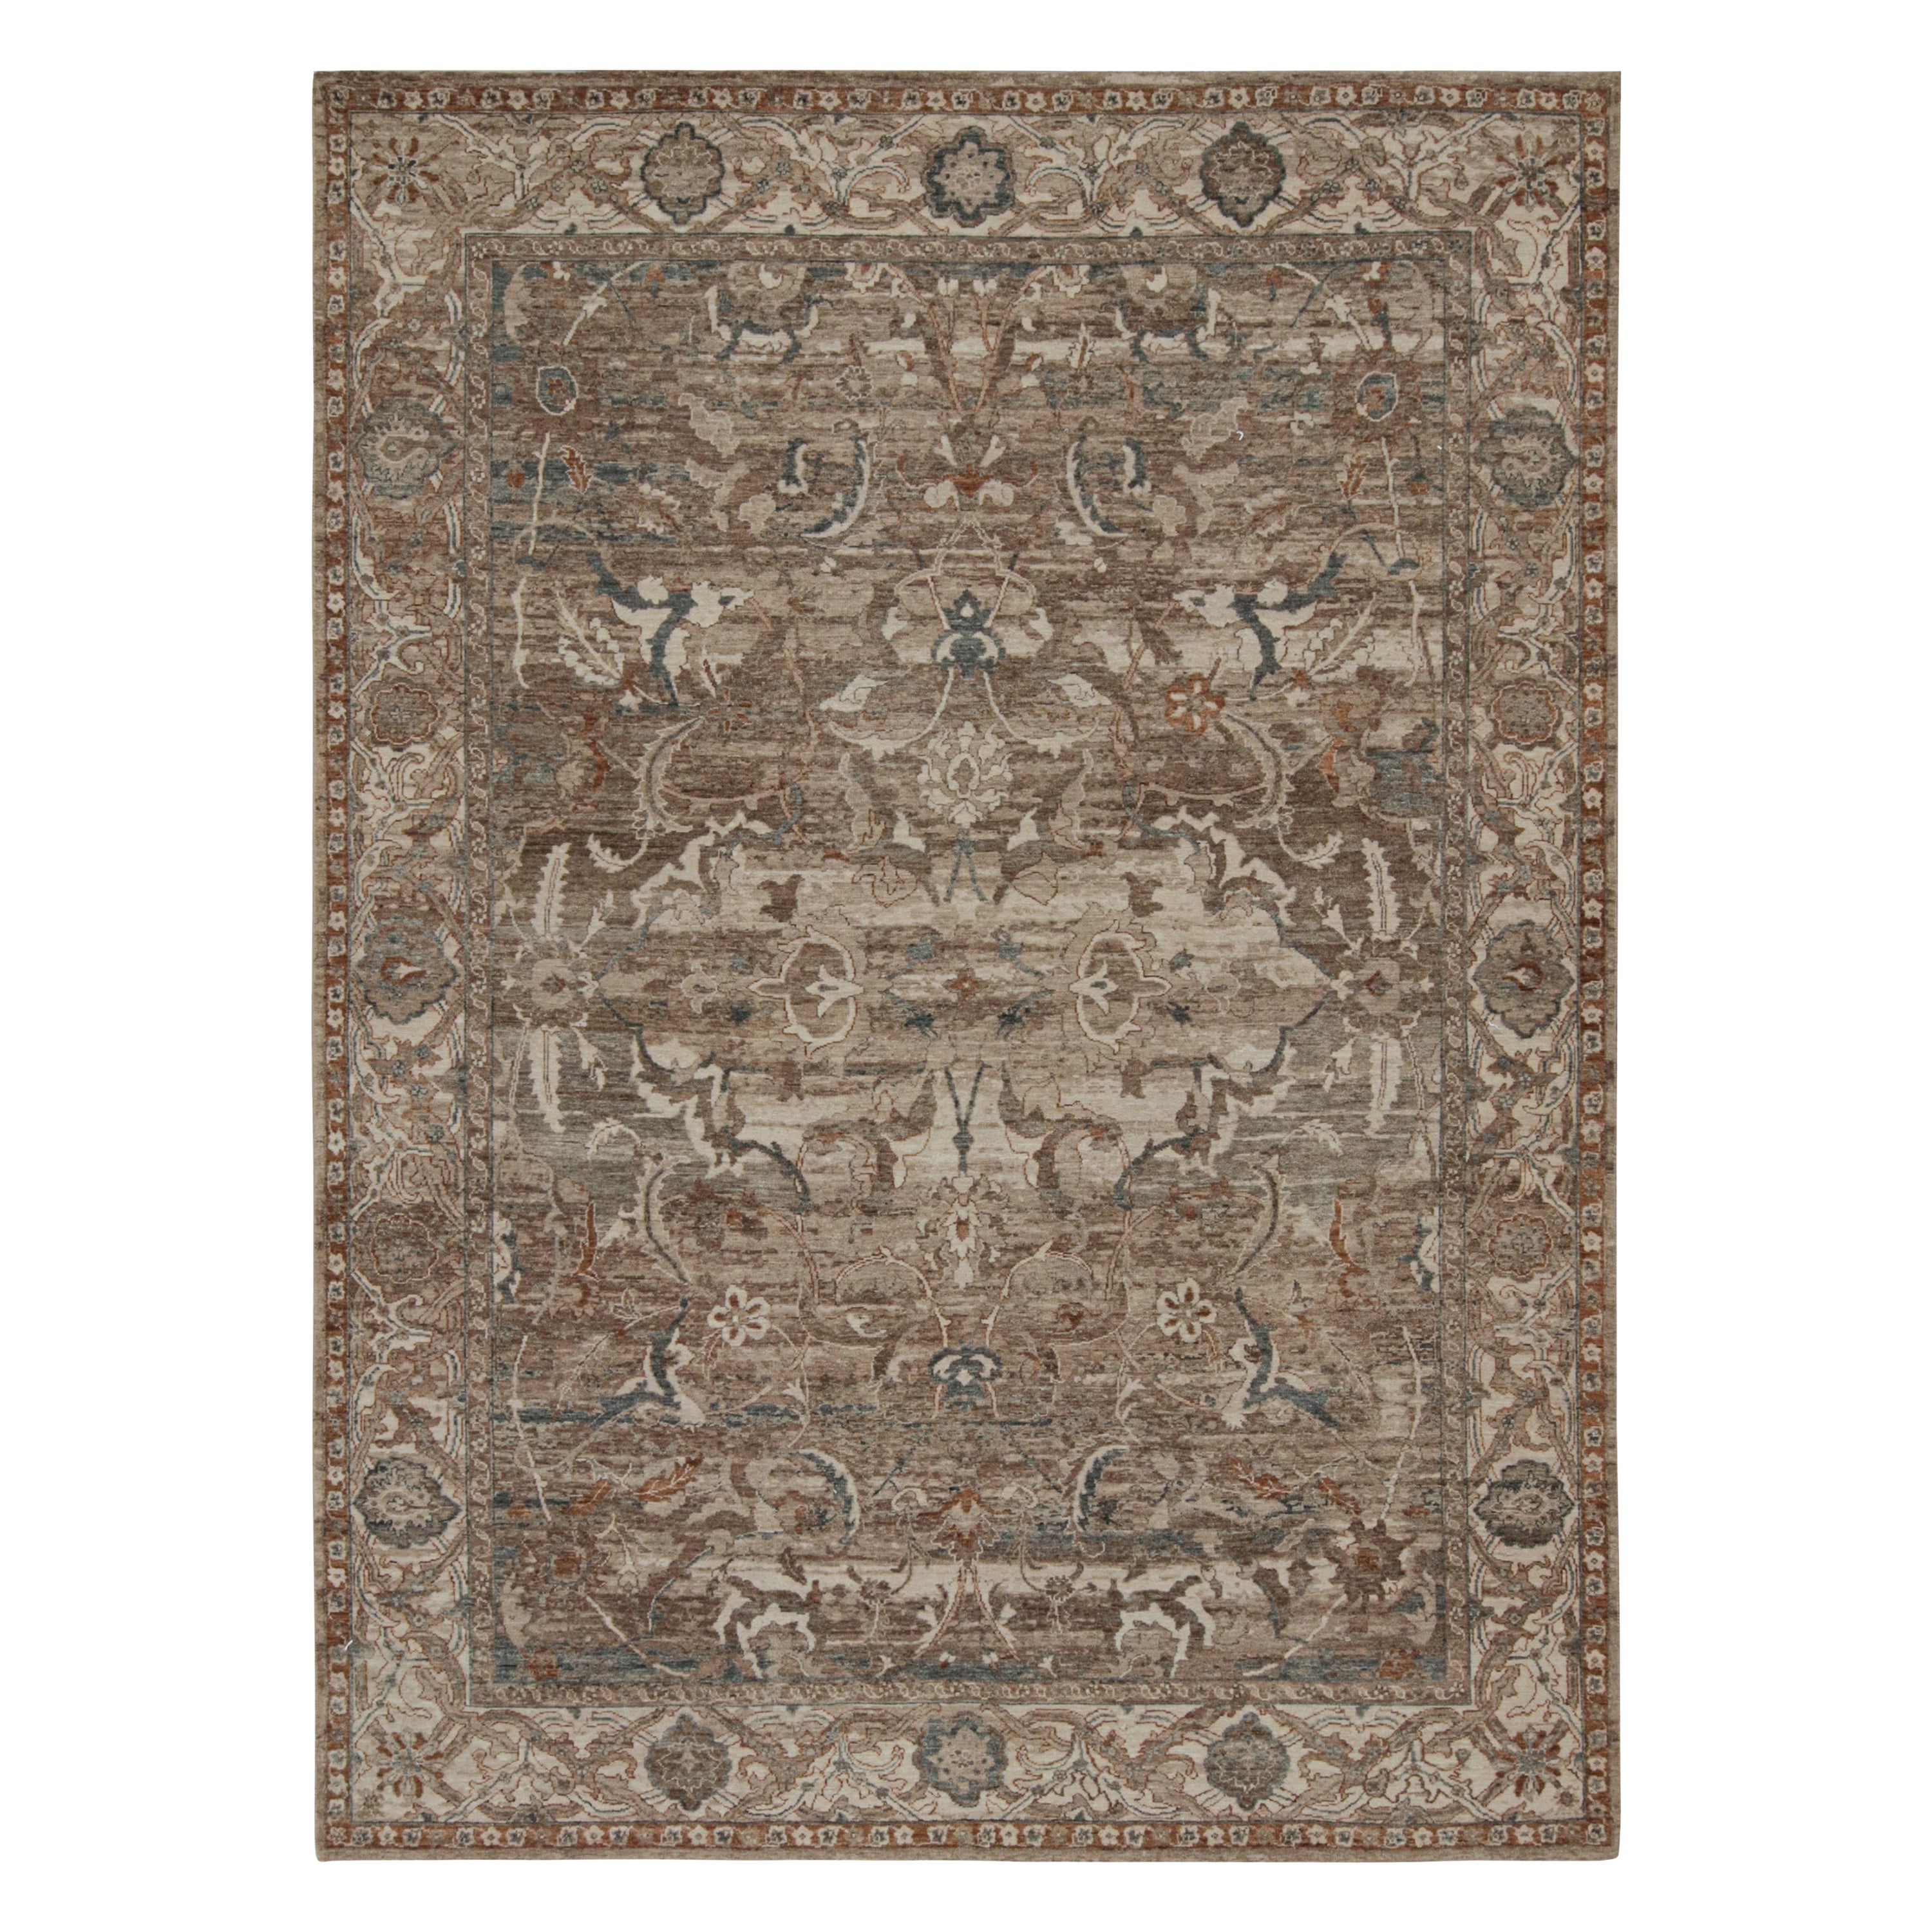 Rug & Kilim’s Modern Classics Rug with Beige-Brown and Navy Blue Floral Patterns